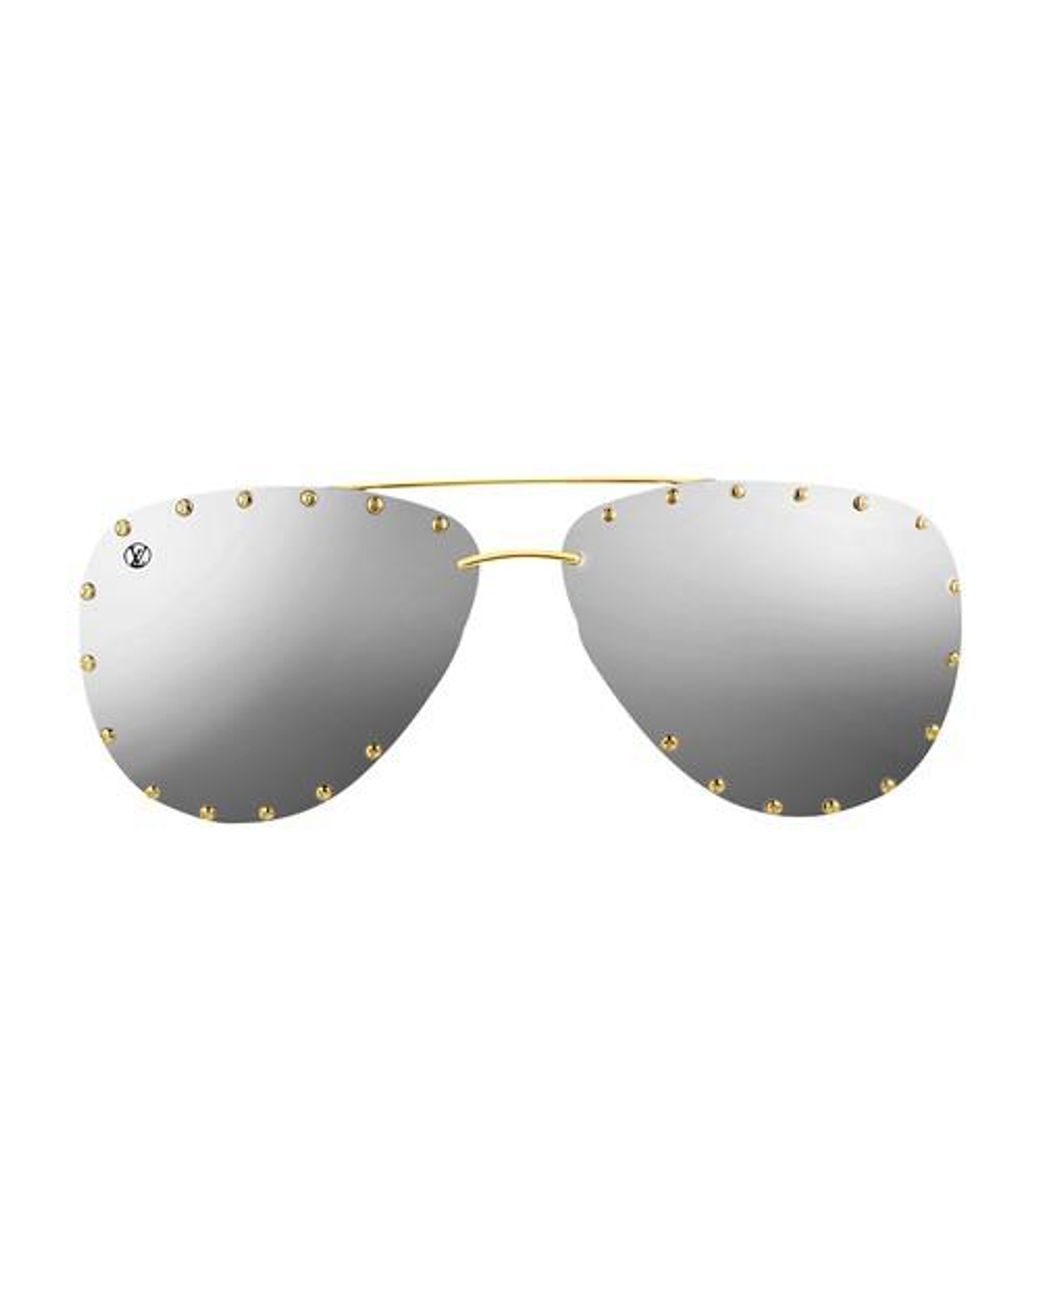 Louis Vuitton The Party Sunglasses in Gray | Lyst